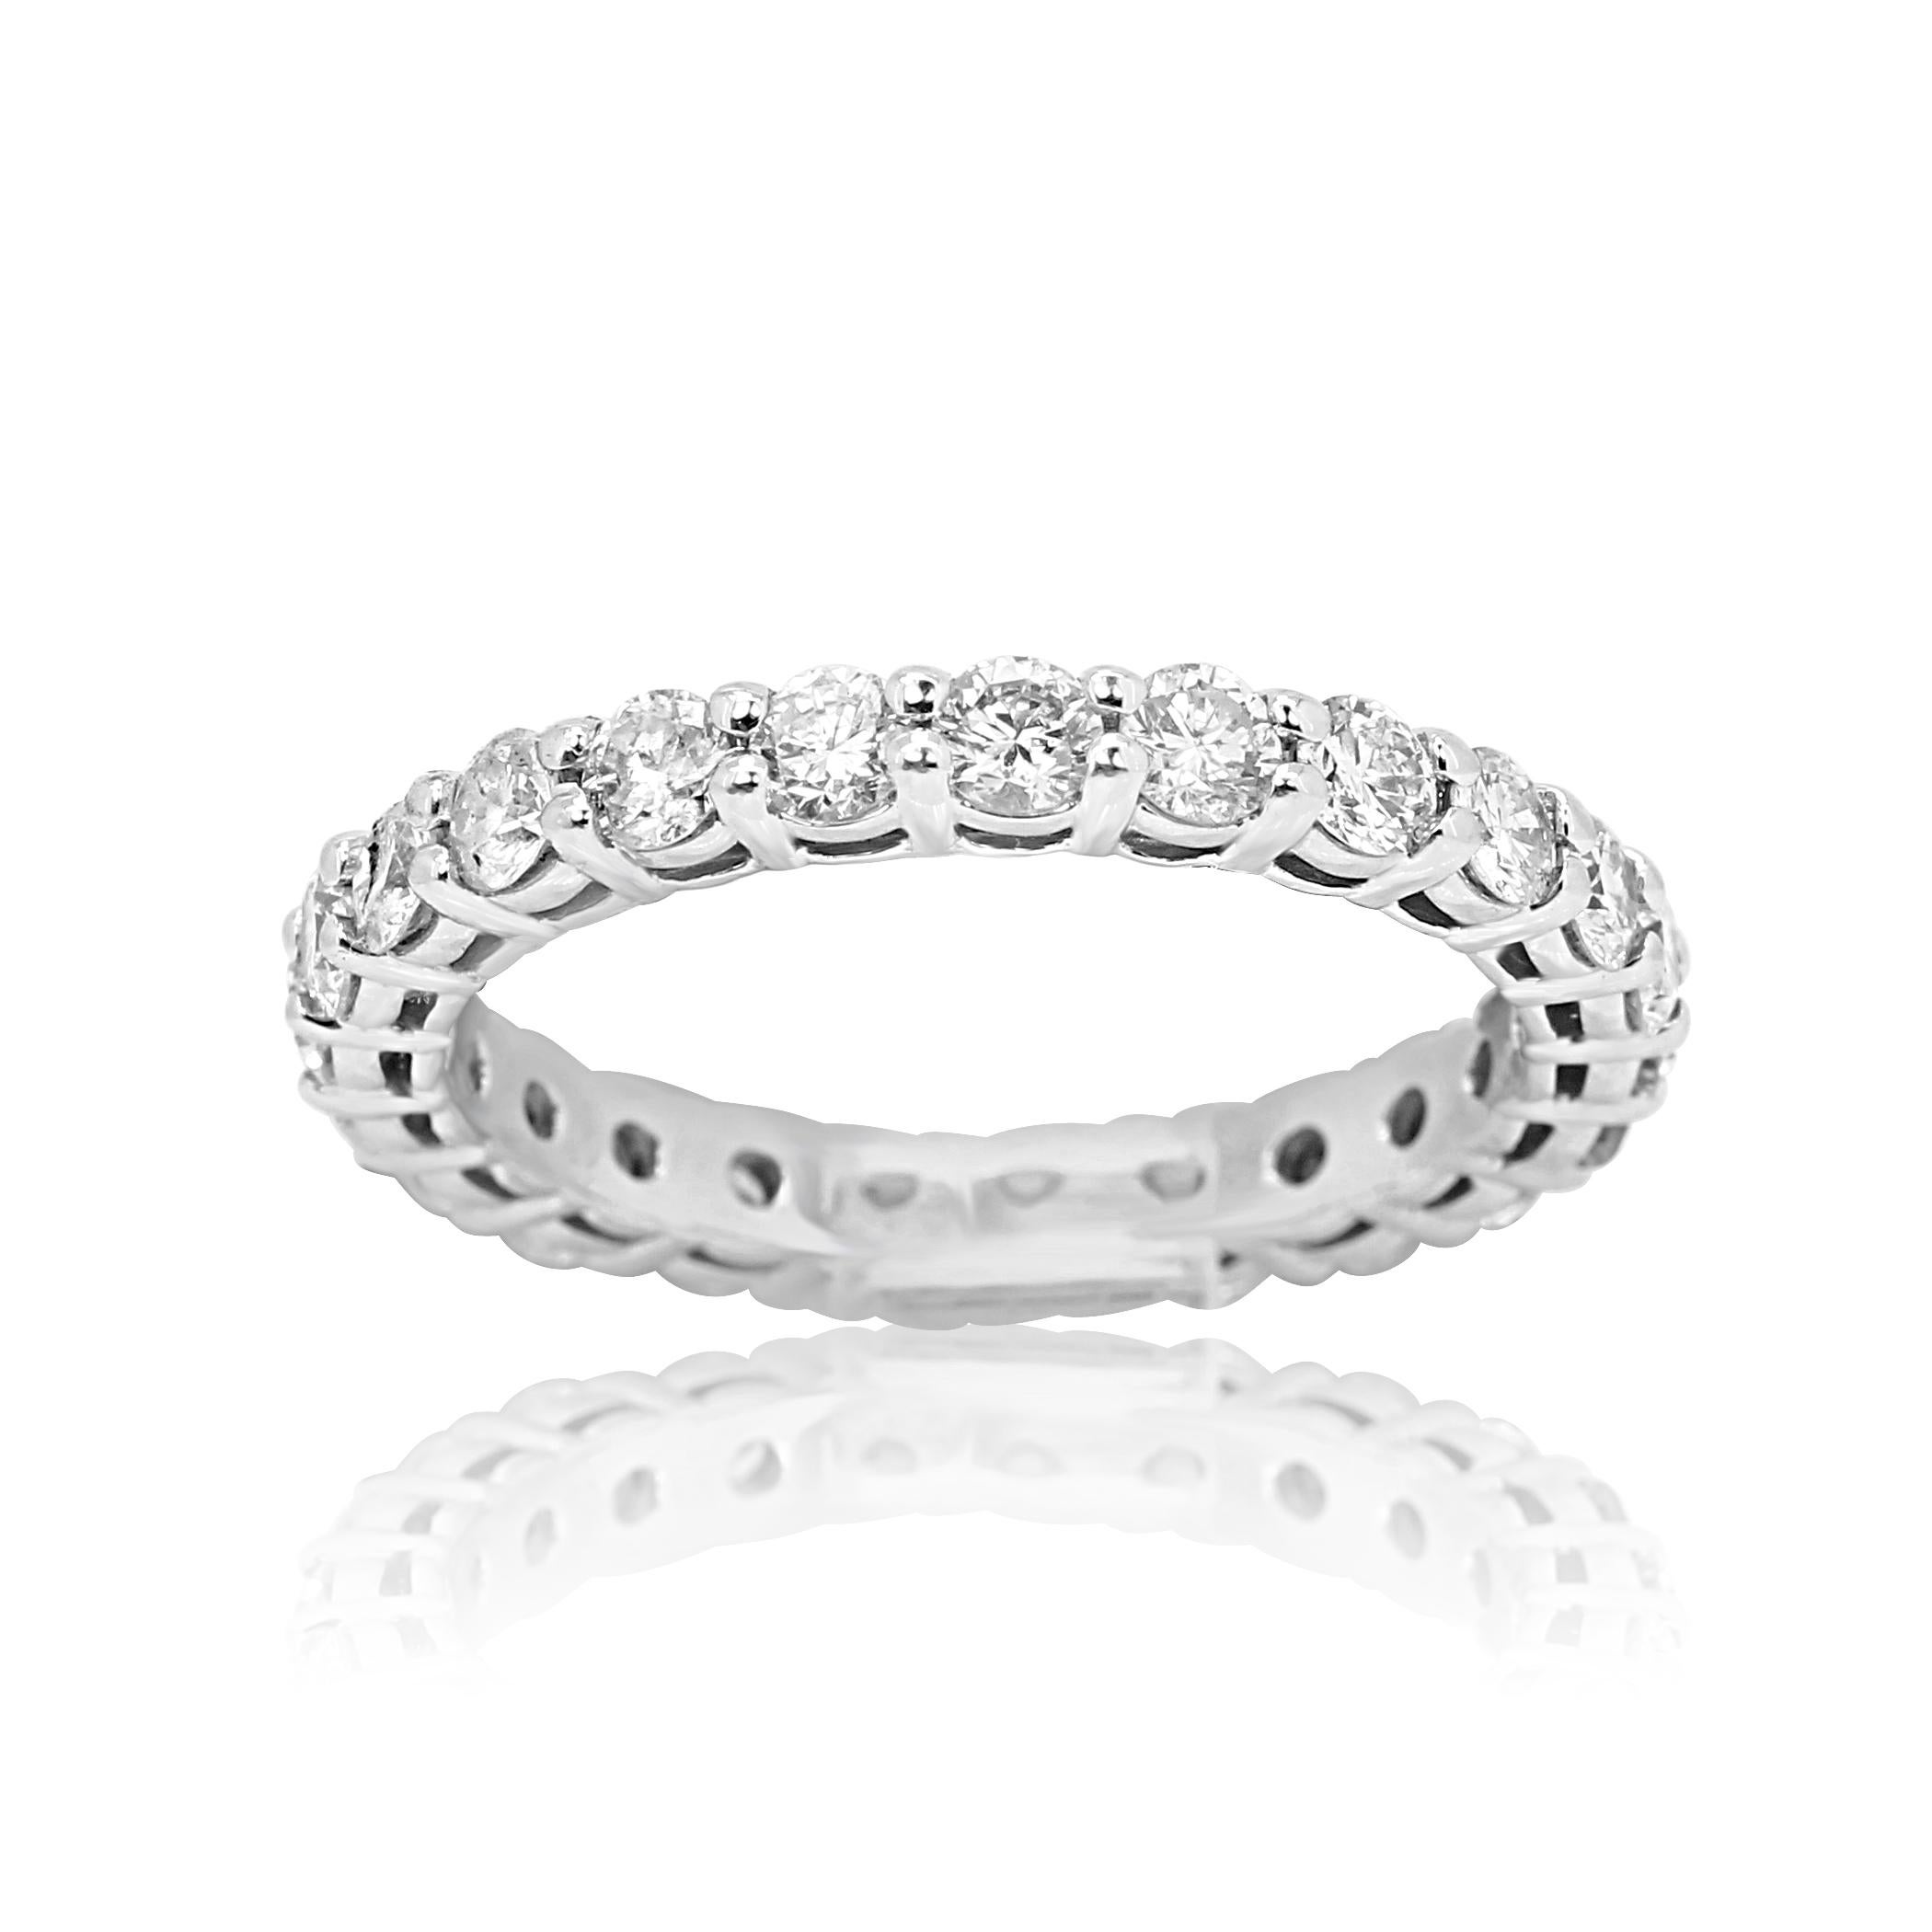 Modern Diamond Round Gold Eternity Bridal Wedding Stackable Cocktail Fashion Band Ring